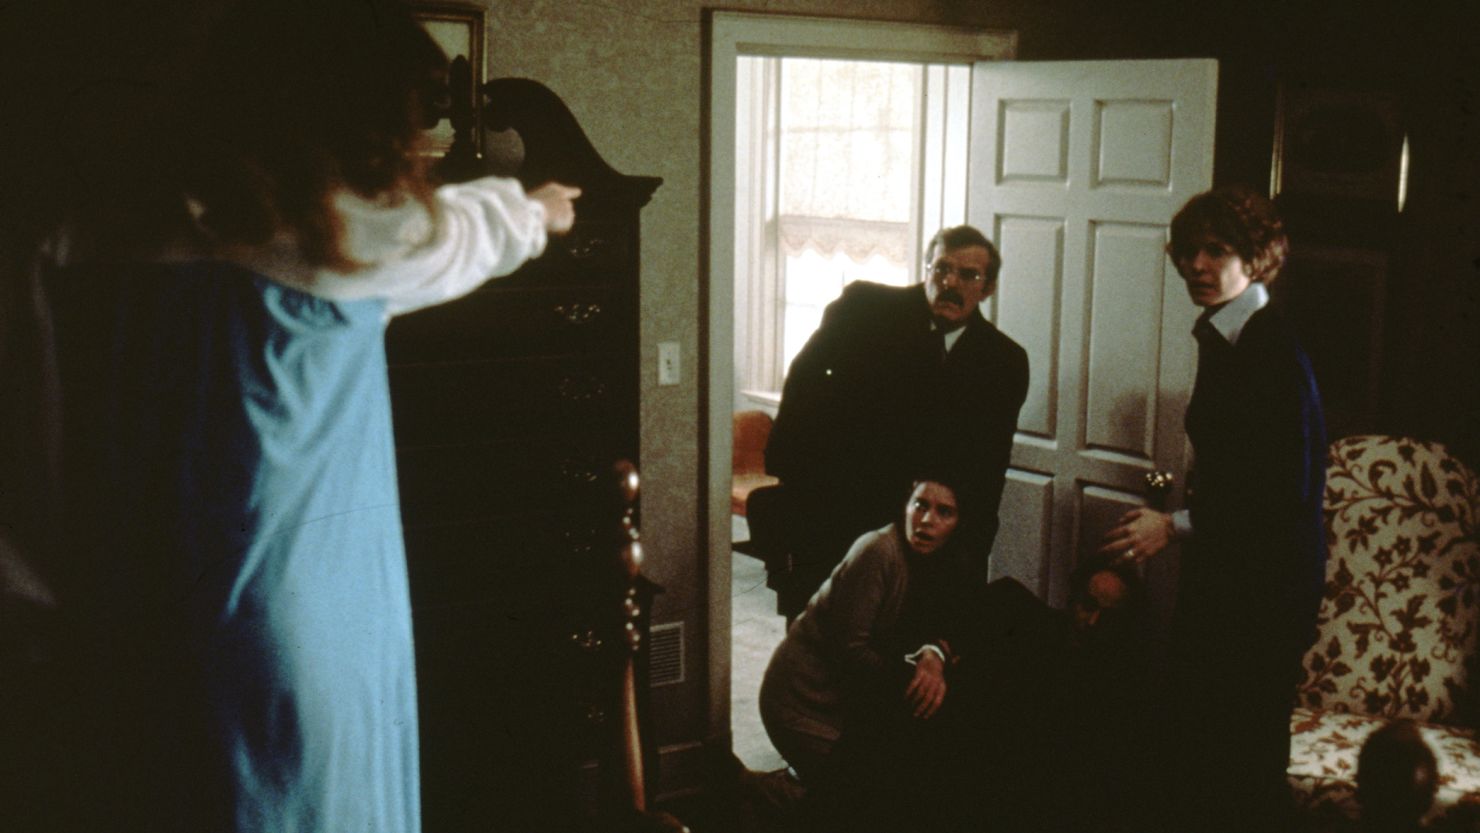 Chris MacNeil (actress Ellen Burstyn, right) looks on in horror as her daughter is controlled by the demon.